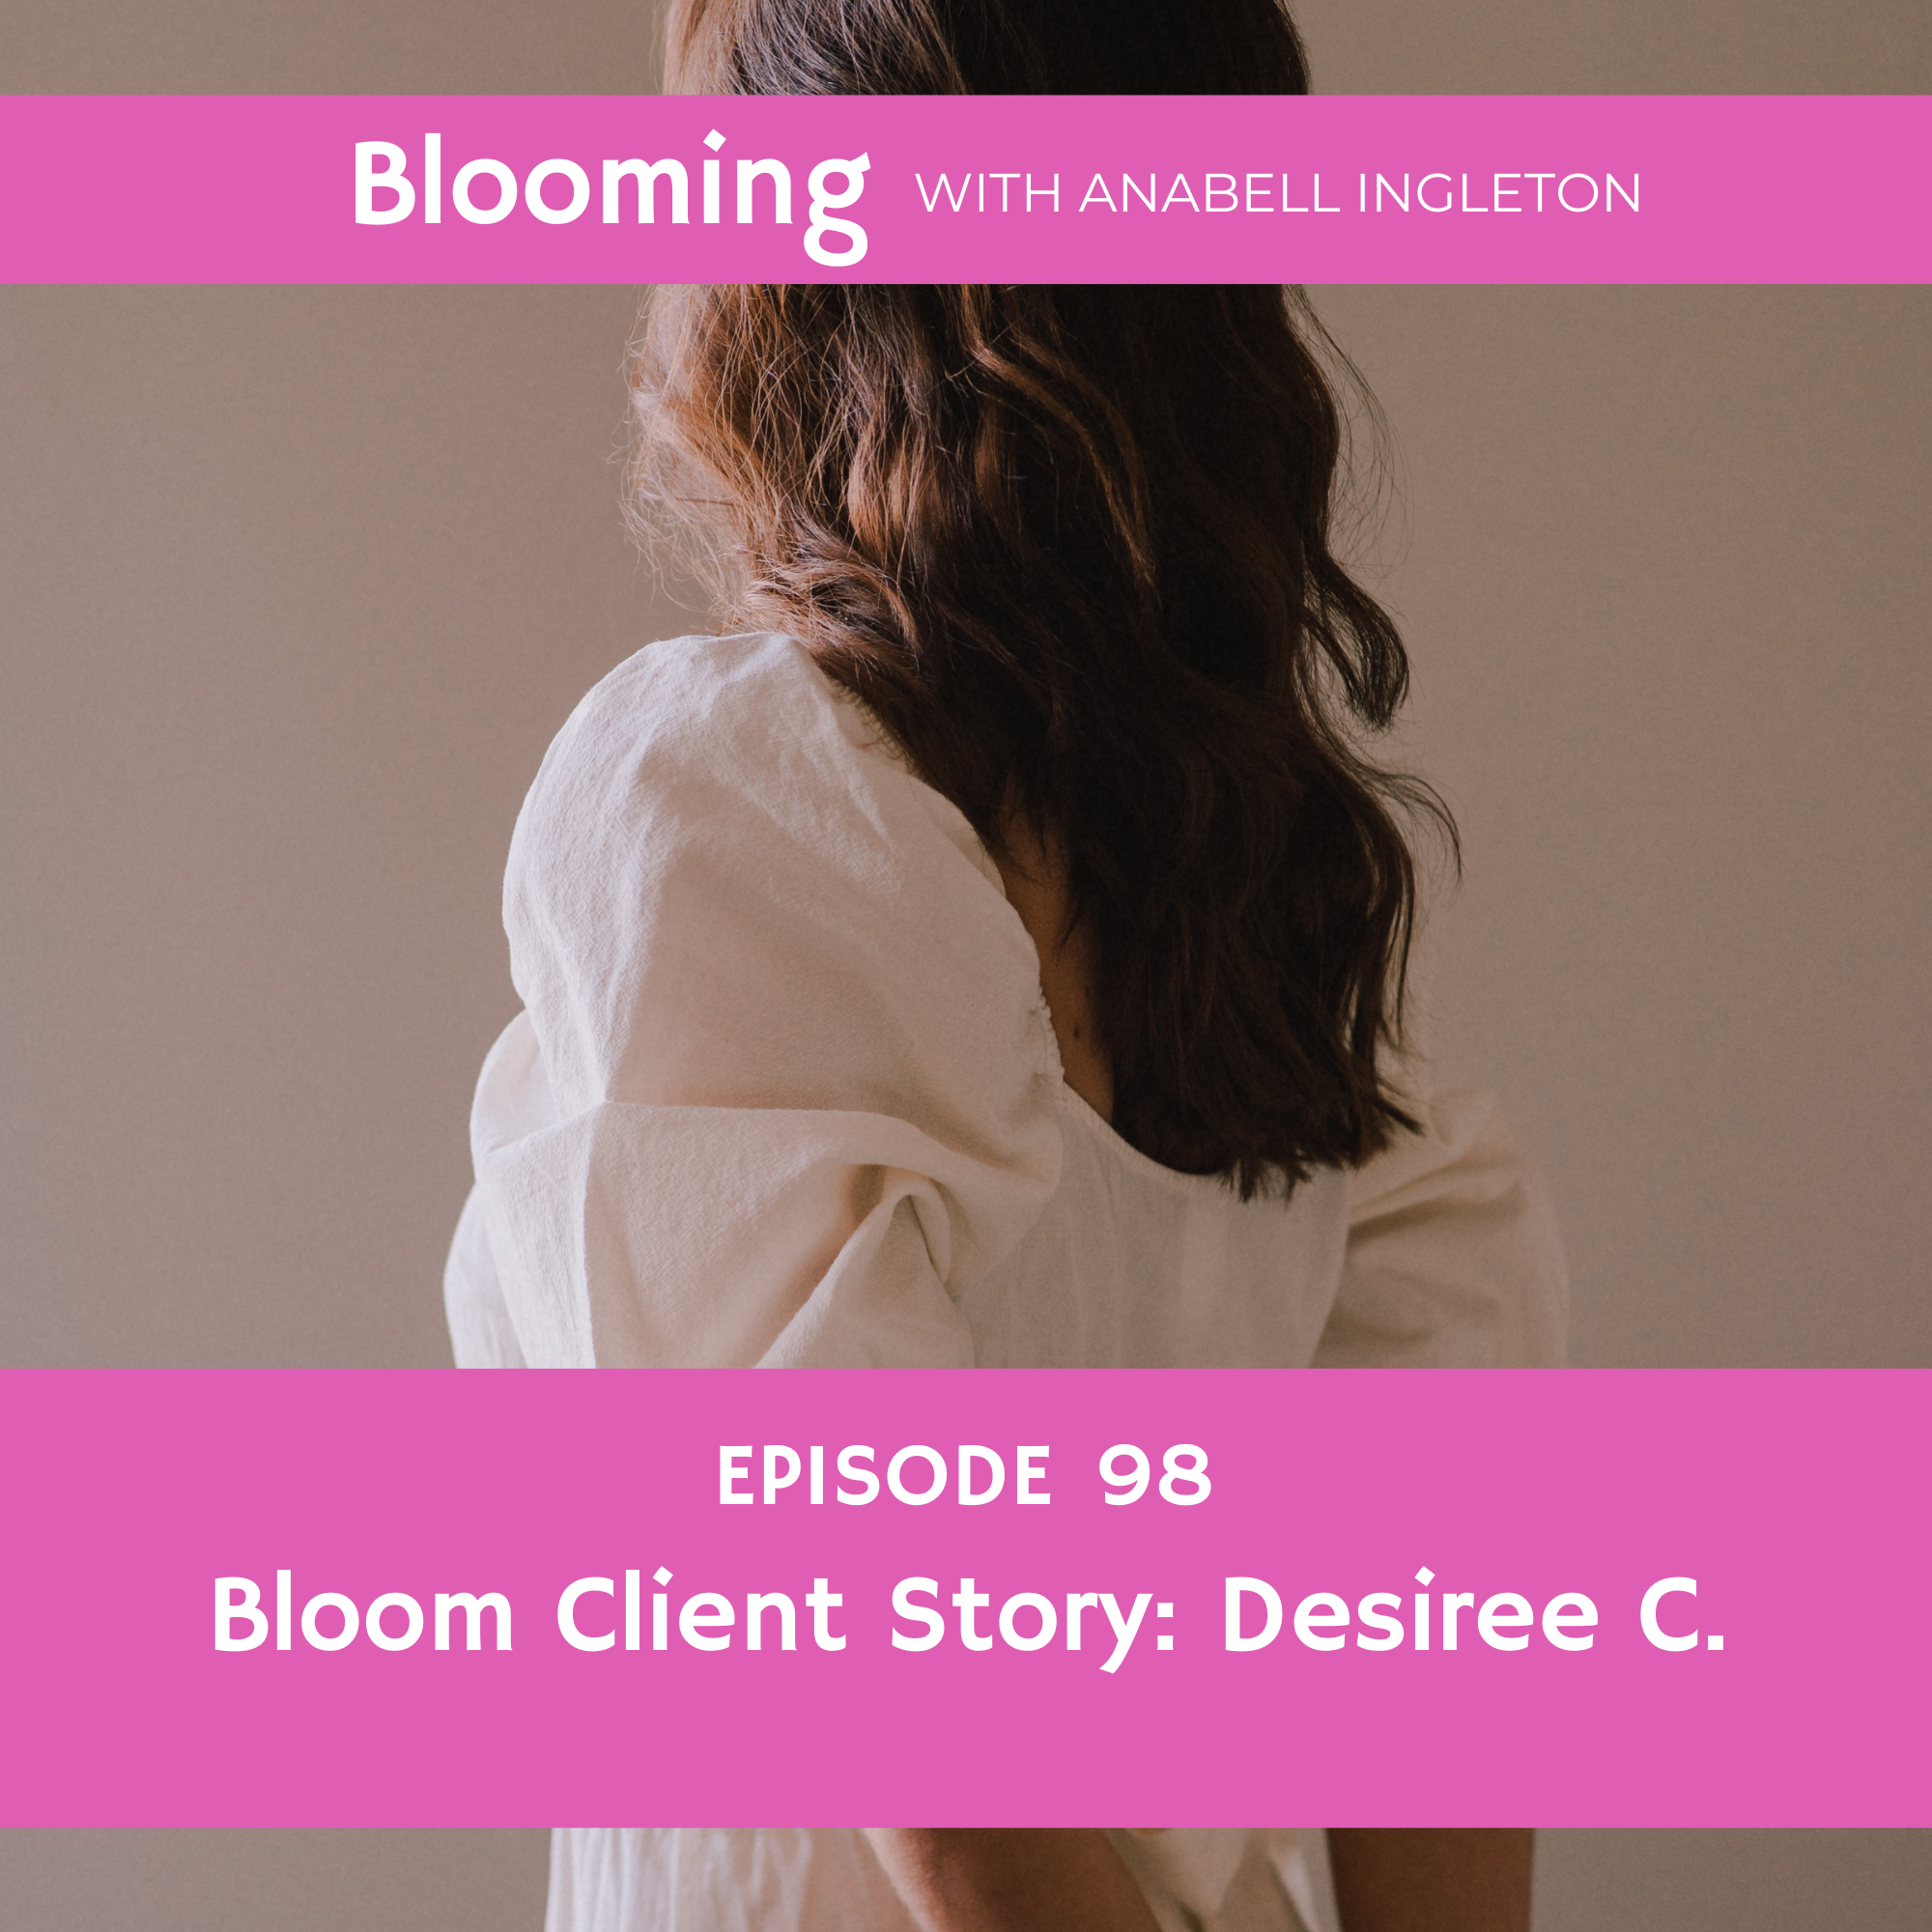 In today's episode , I'm excited to share with you an first time interview with a Bloom member to give you a glimpse inside the program. I am talking to Bloom's Client Desiree about her experience inside Bloom.